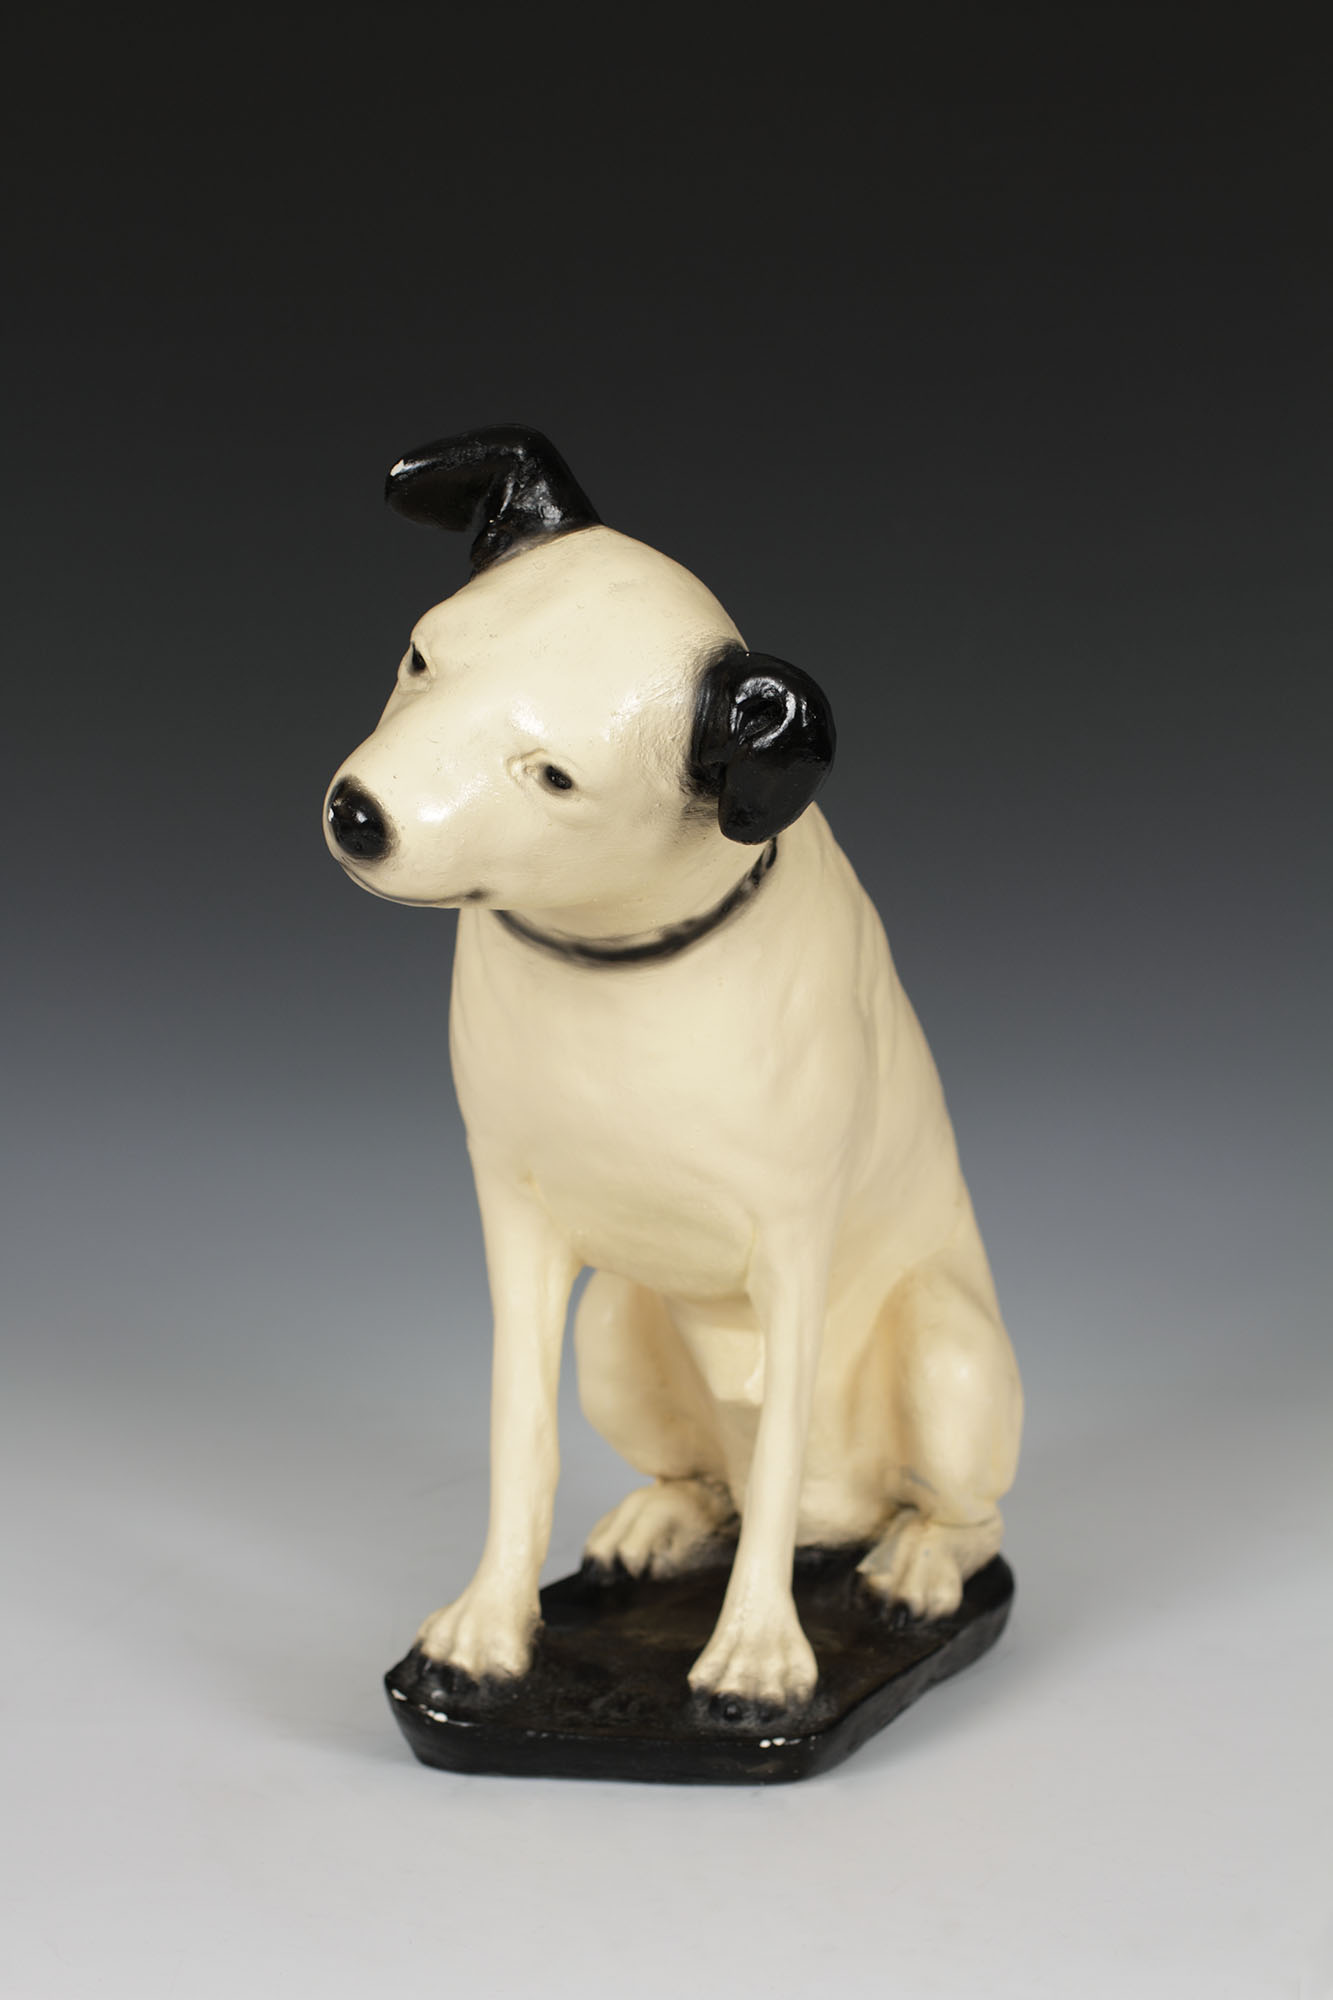 Nipper - Albany Institute of History and Art